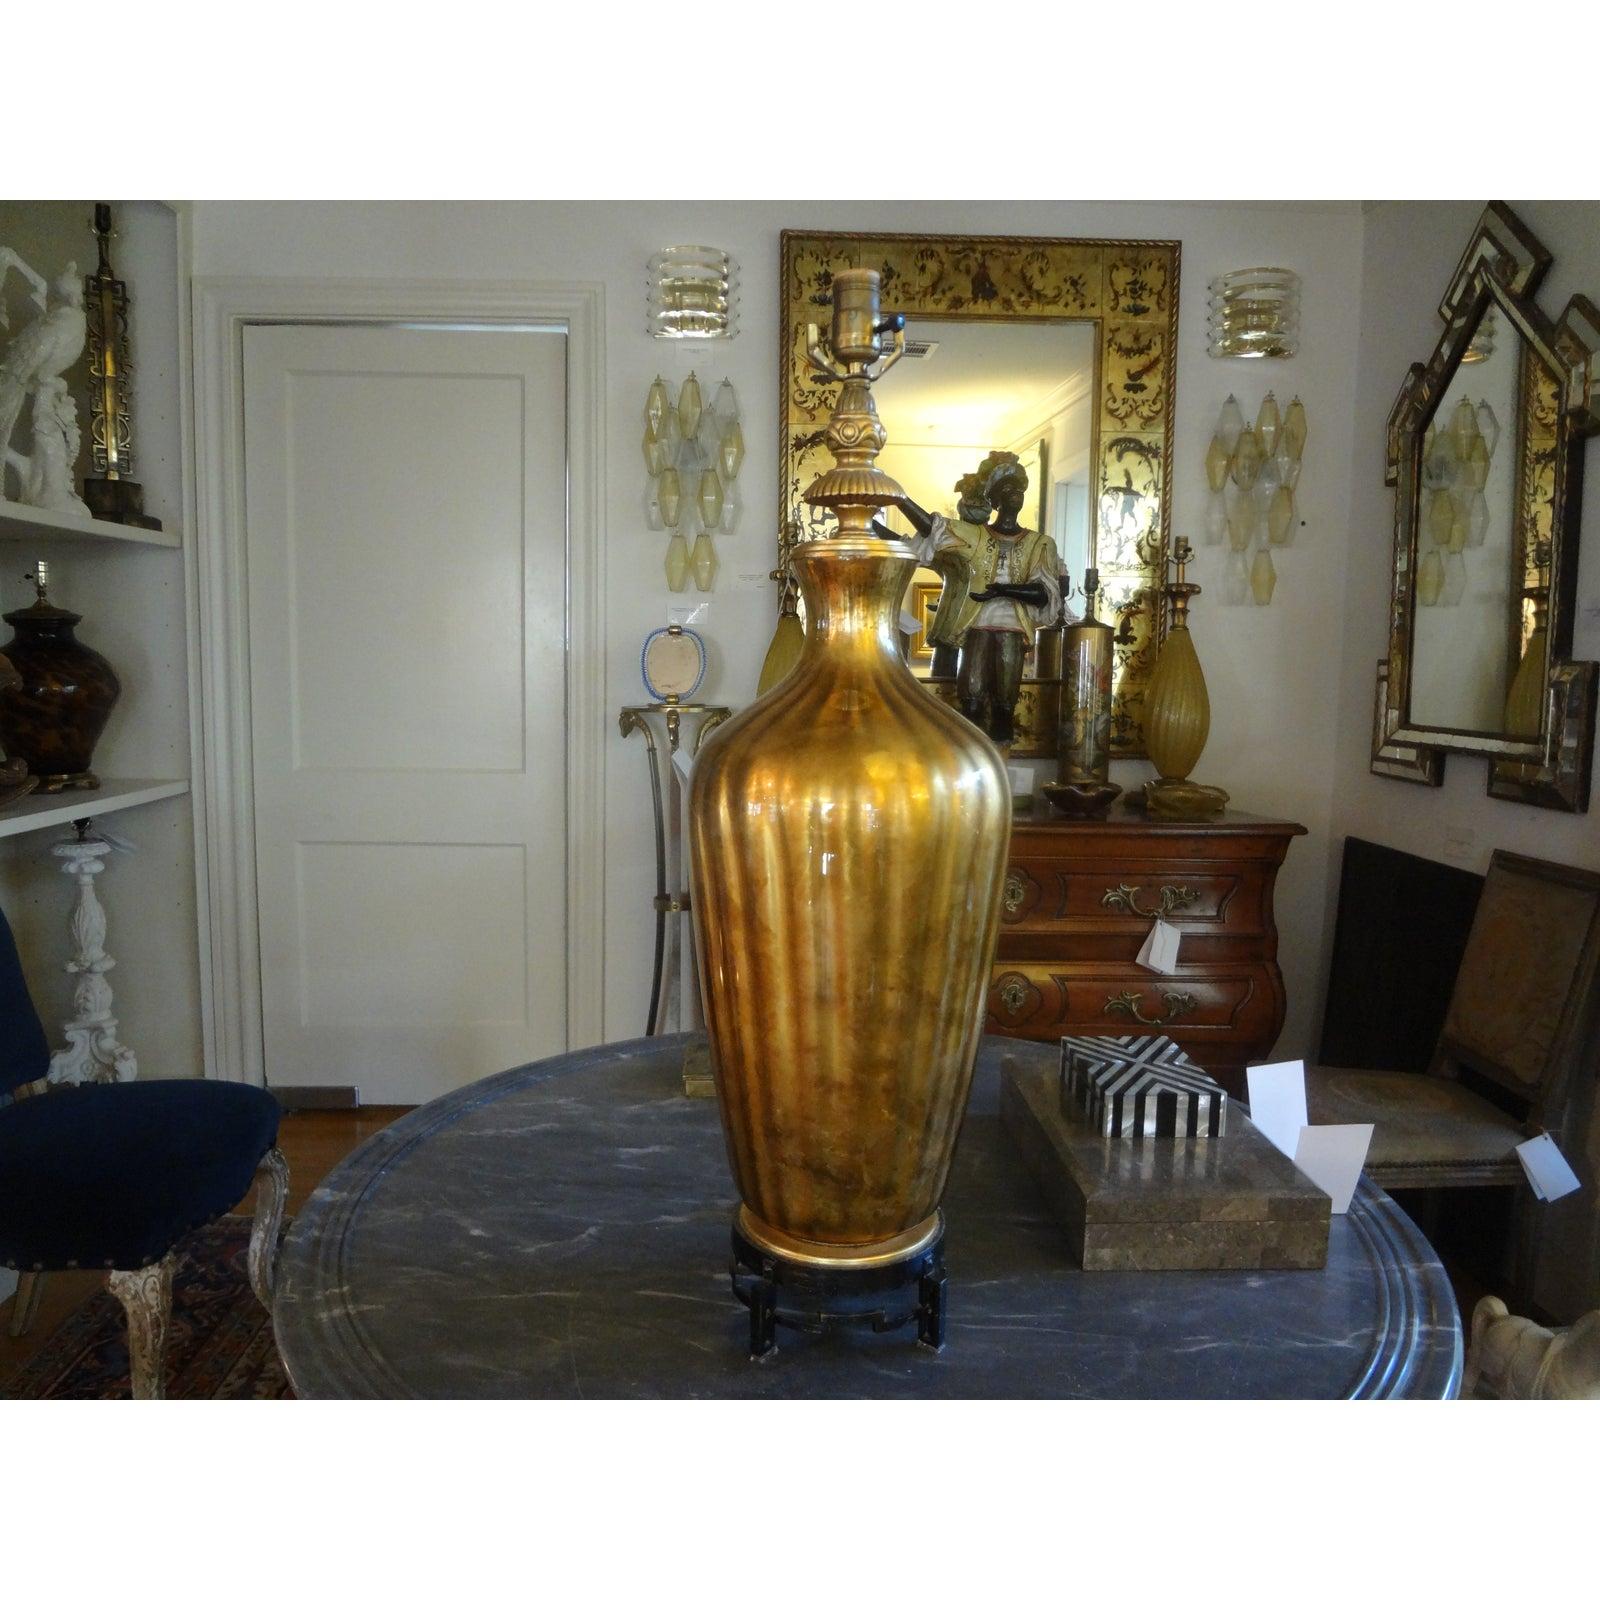 Italian Midcentury Gold Glass Lamp on Iron Base-Marbro Attributed.
Large scale Italian gold blown glass on interesting Asian Modern iron base. This high quality Hollywood Regency lamp is attributed to Marbro and would look great in a variety of